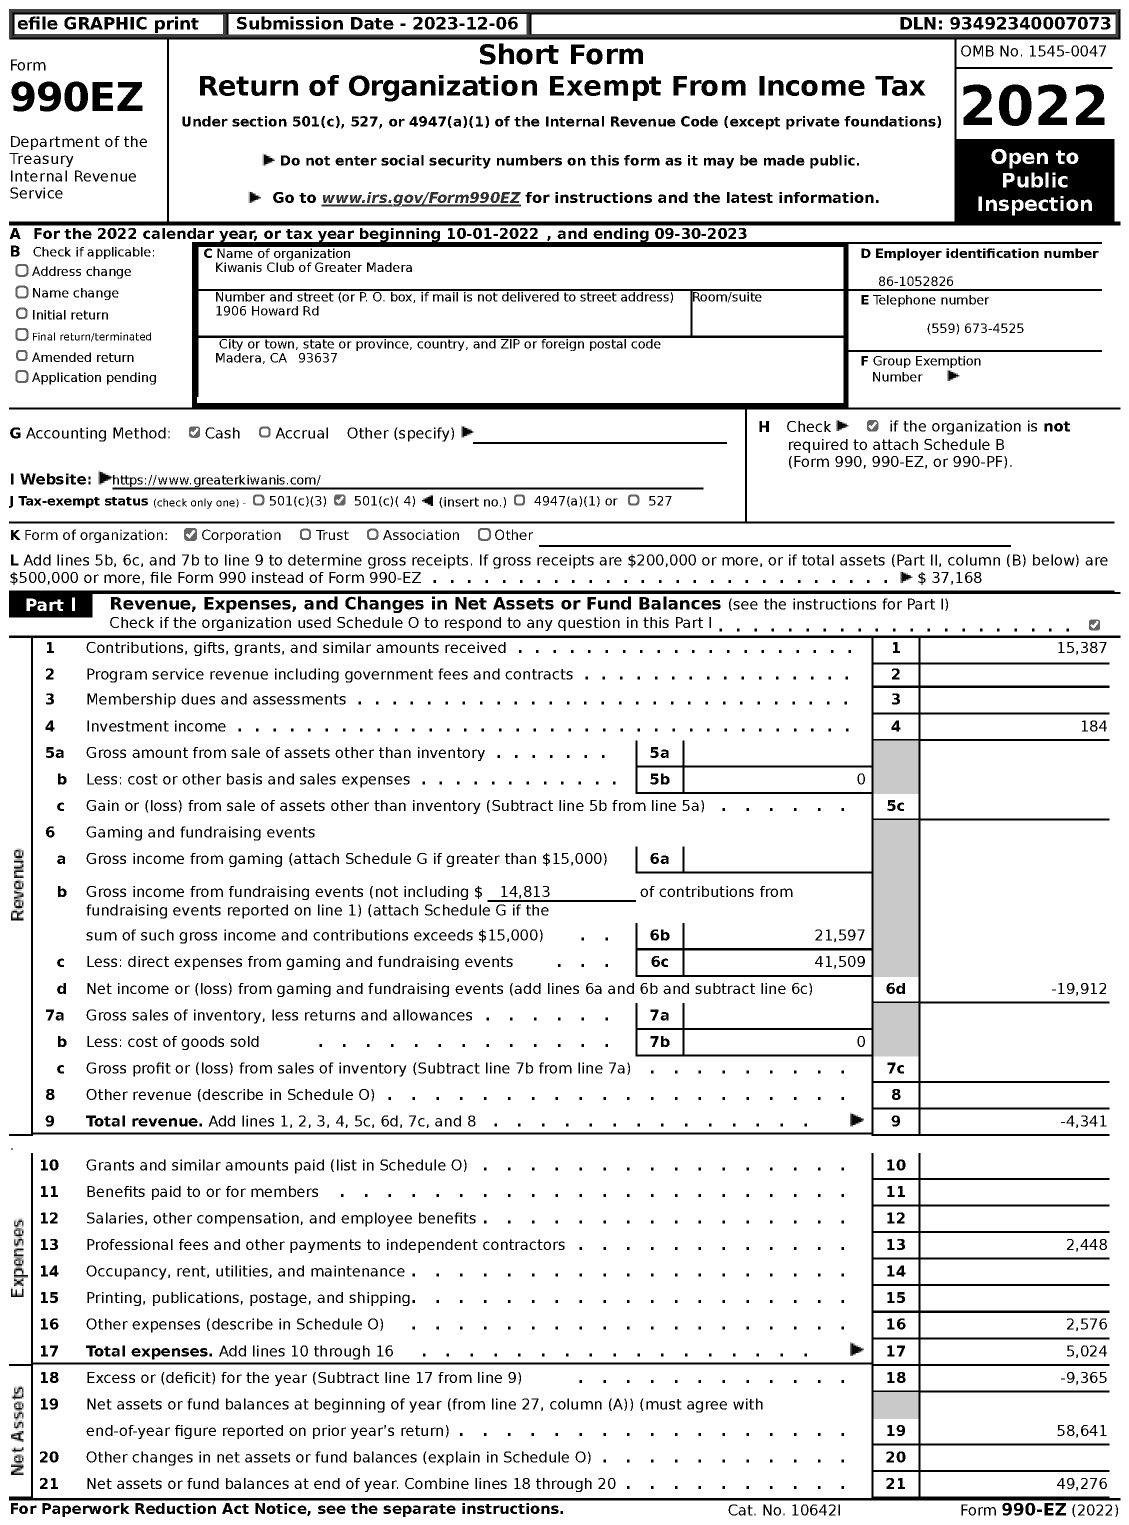 Image of first page of 2022 Form 990EZ for Kiwanis International - K16742 MCH Sunrise-Madera